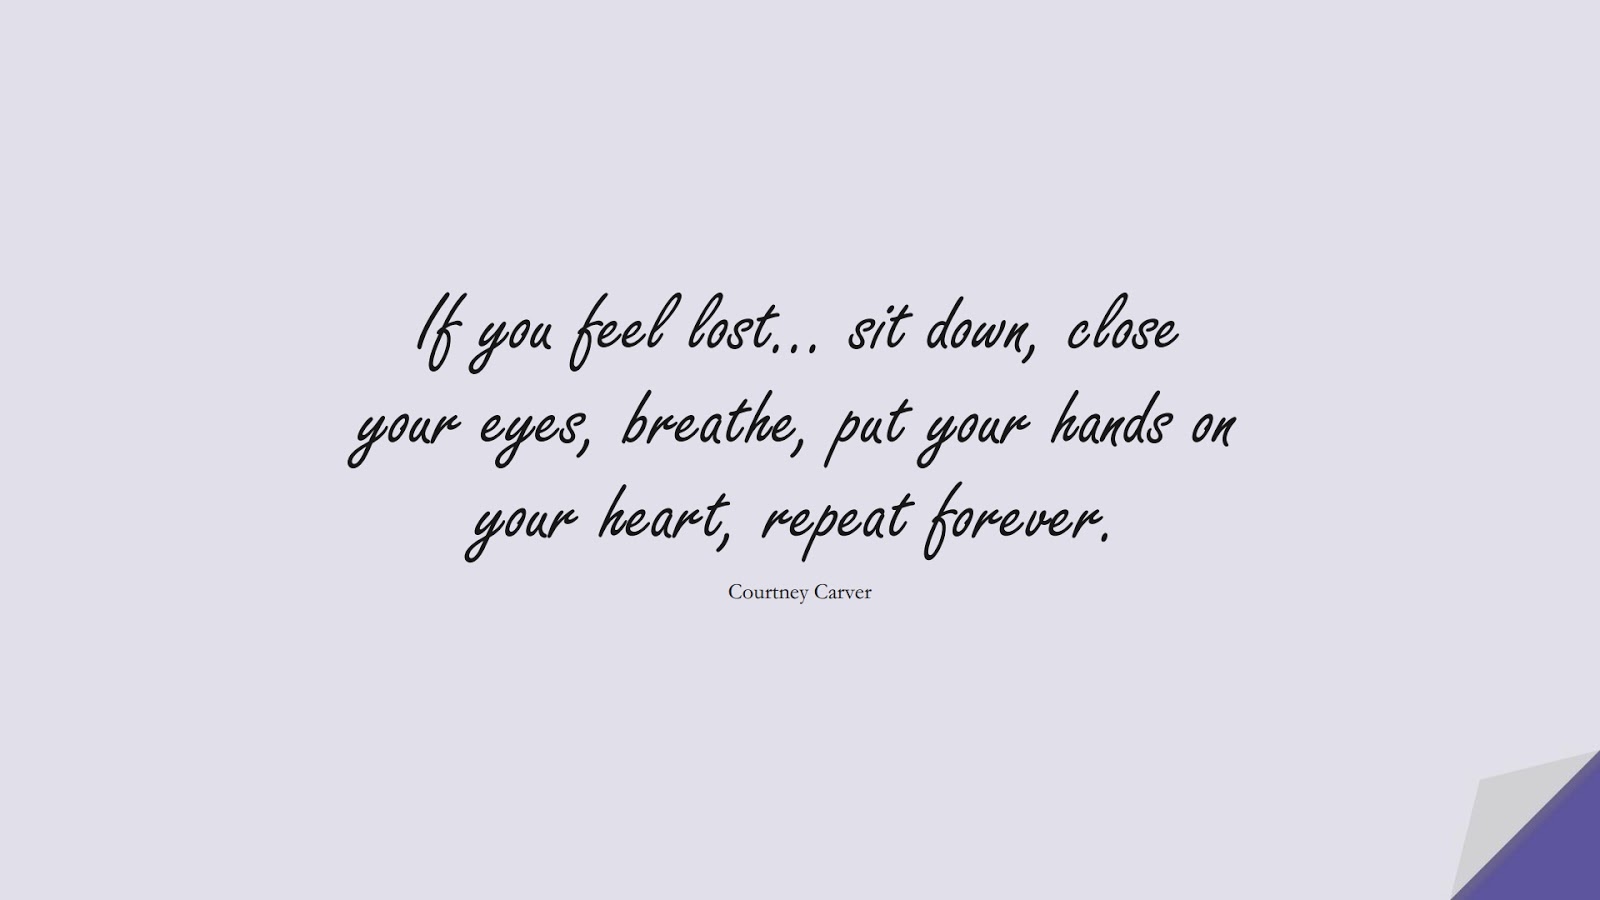 If you feel lost… sit down, close your eyes, breathe, put your hands on your heart, repeat forever. (Courtney Carver);  #StressQuotes